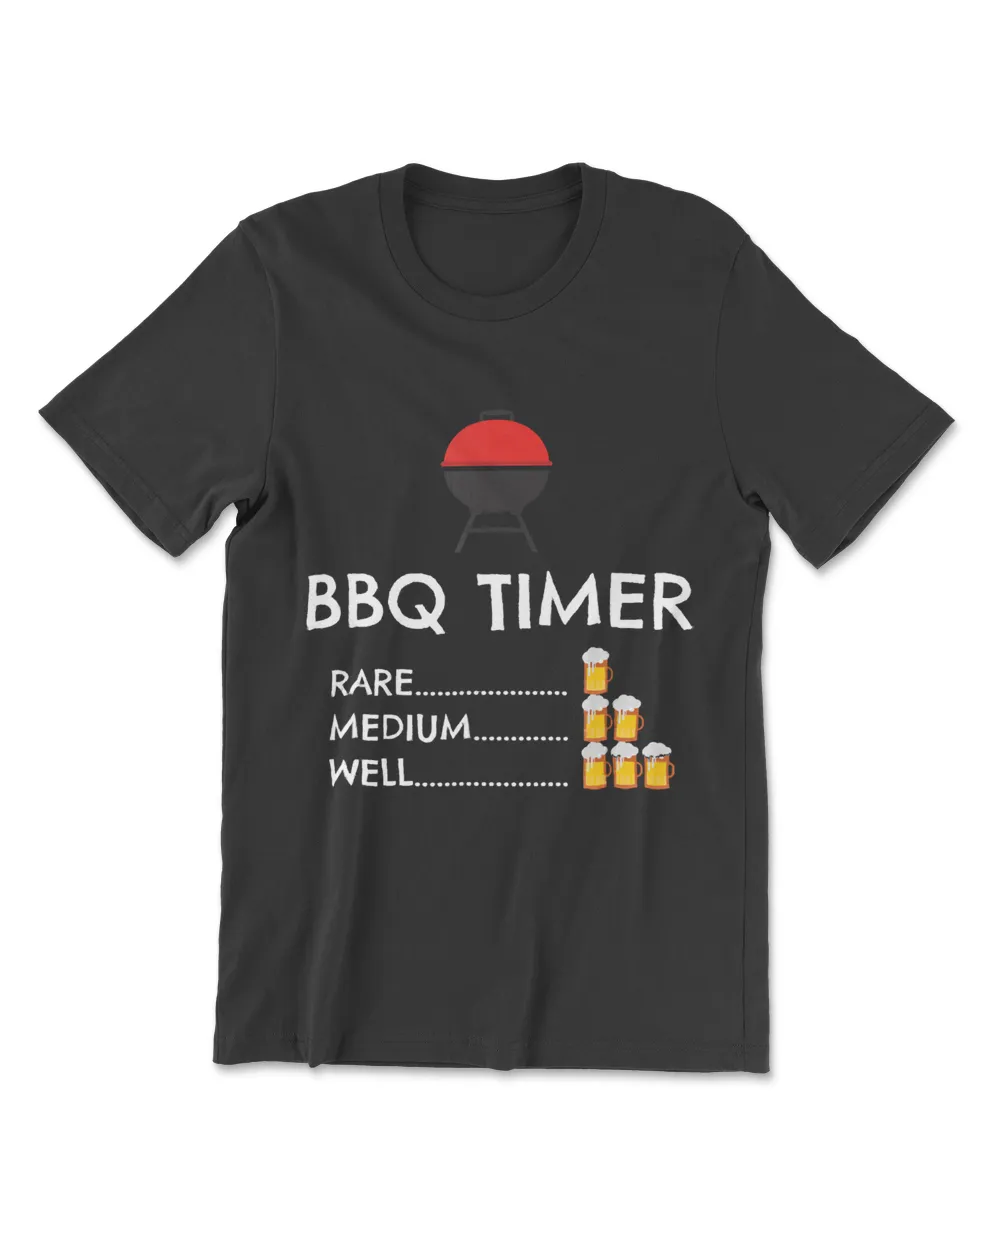 BBQ Timer Barbecue Shirt Funny Grill Grilling Gift